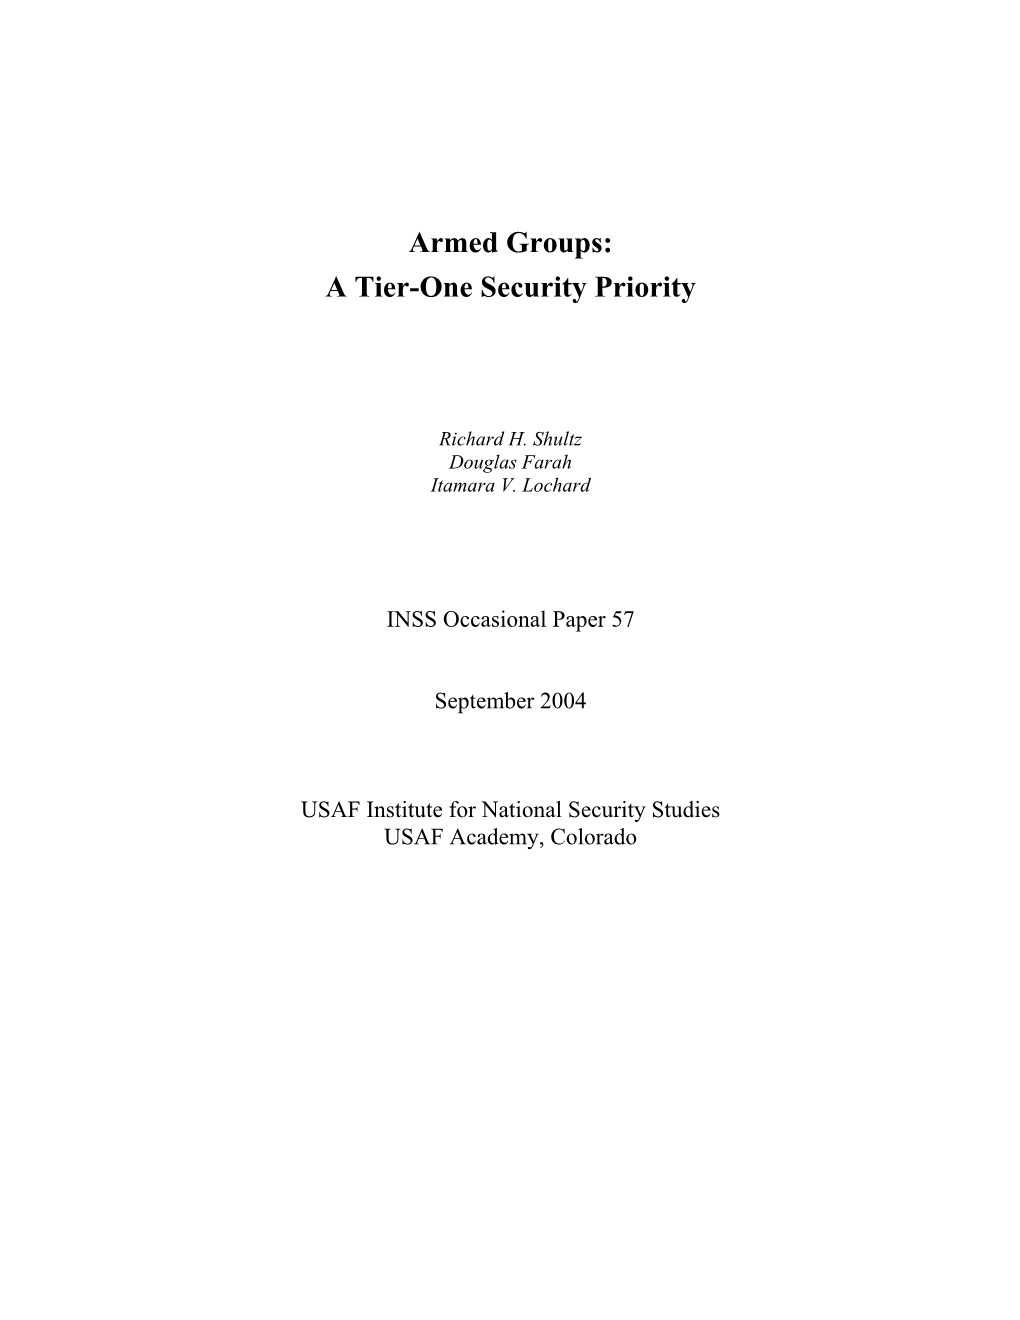 Armed Groups: a Tier-One Security Priority